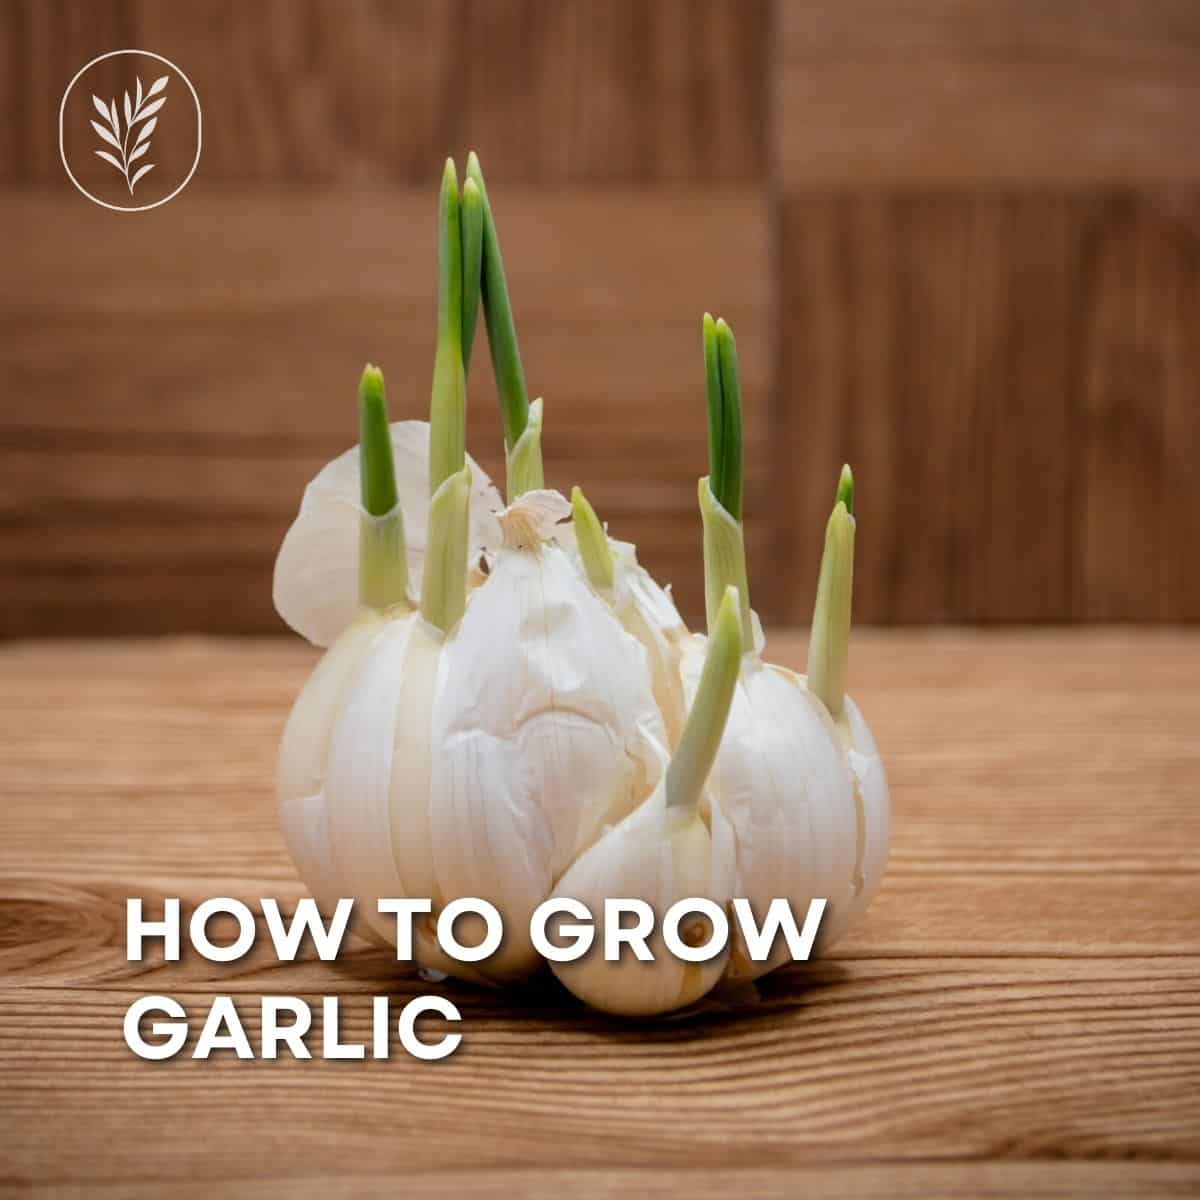 It's time to learn how to grow garlic! Fortunately, garlic is one of the most rewarding crops to grow in the garden. It takes very little effort to grow but is frequently used in the kitchen. You'll spend more time enjoying it in your cooking than tending to it in the garden. Here are the basic steps for how to grow garlic: via @home4theharvest